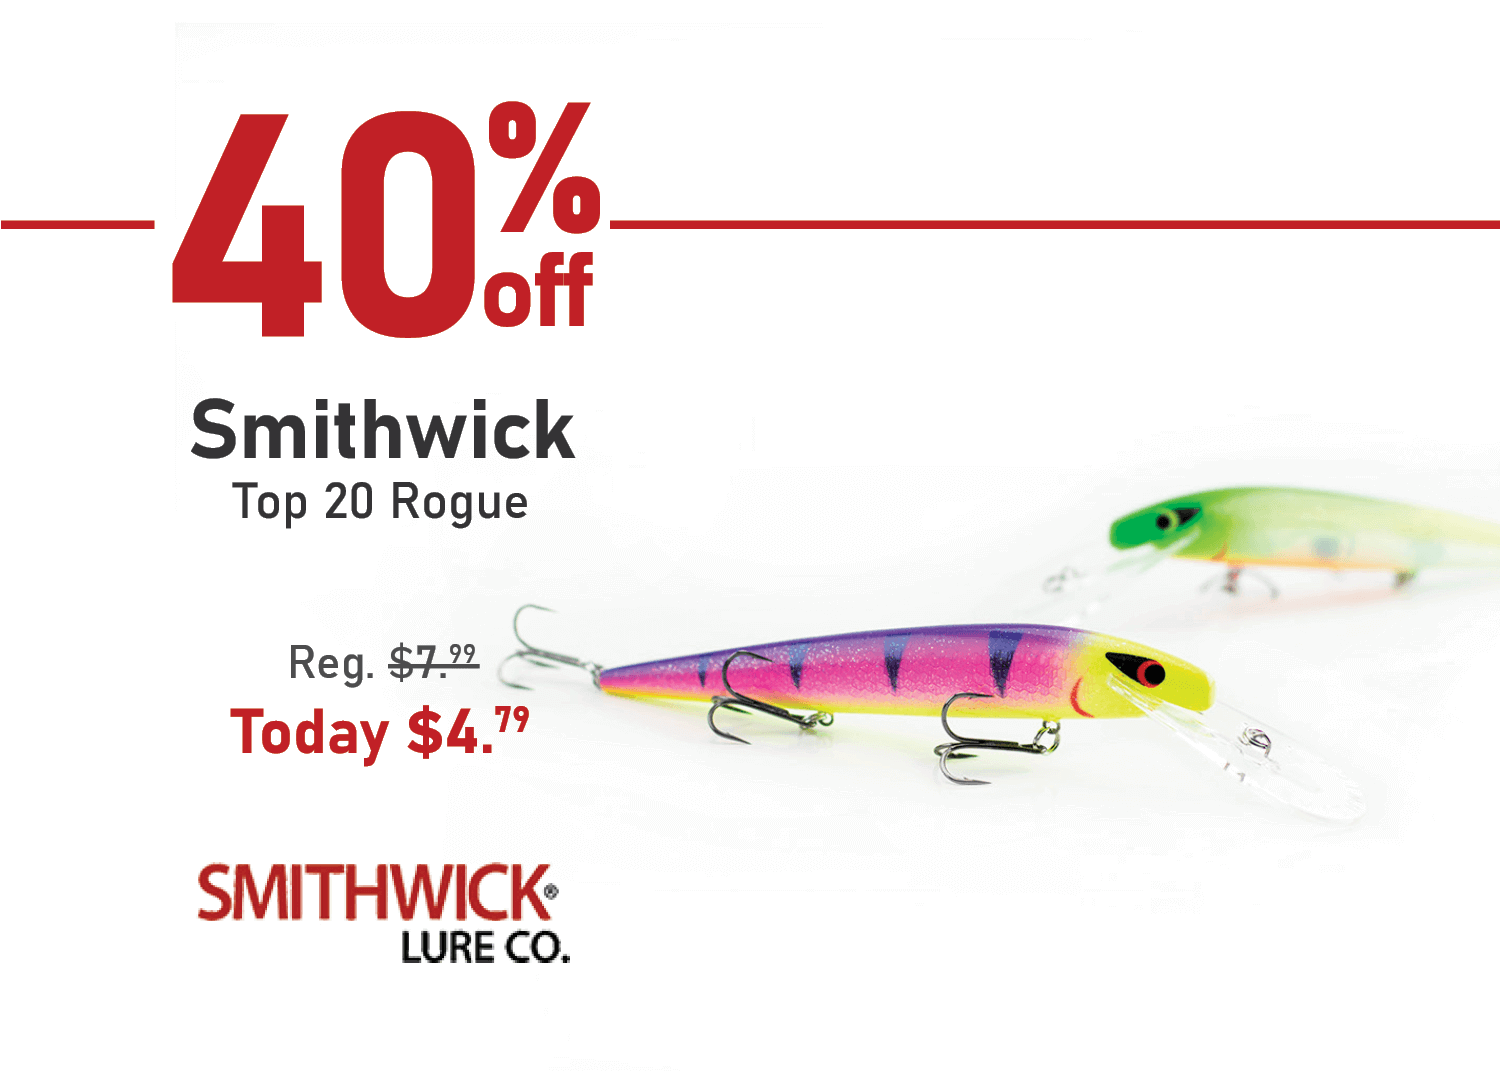 Save 40% on Smithwick Top 20 Rogue